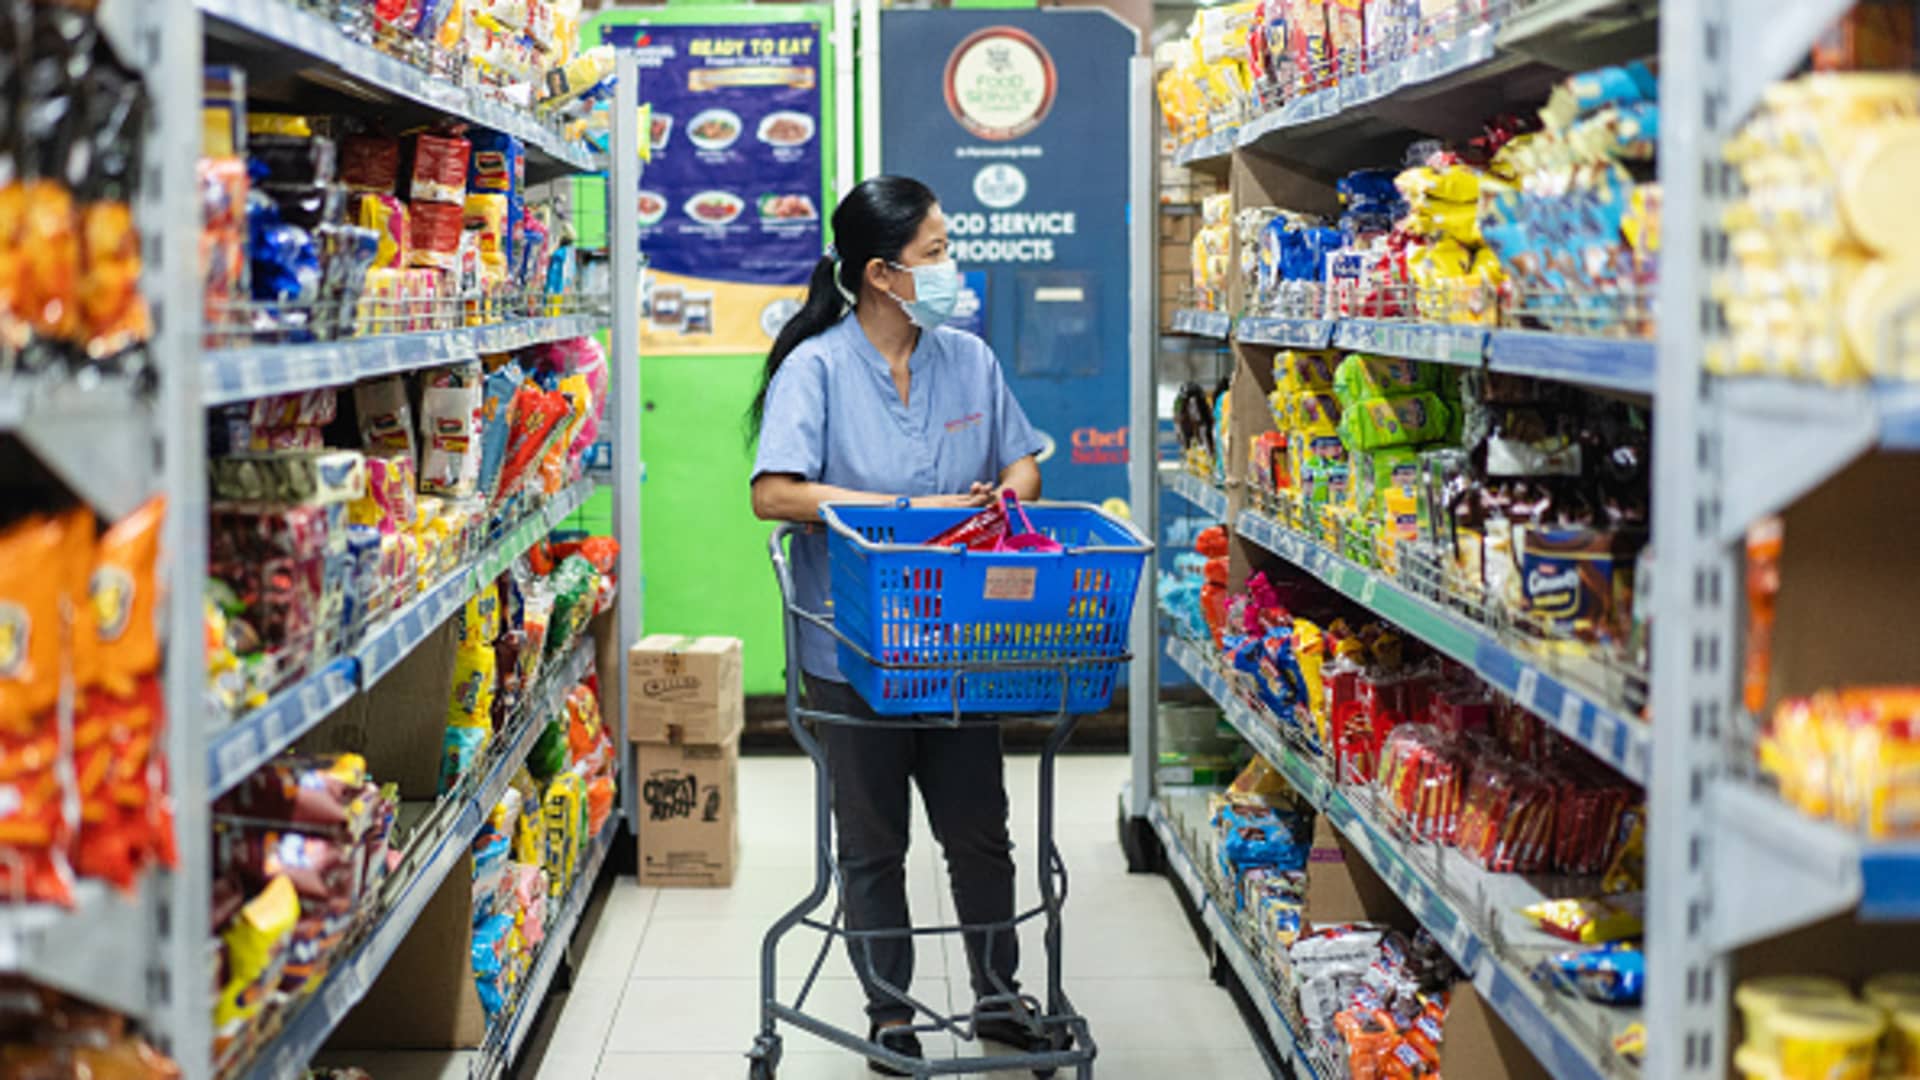 Inflation is here to stay despite rising interest rates, Asian business leaders warn